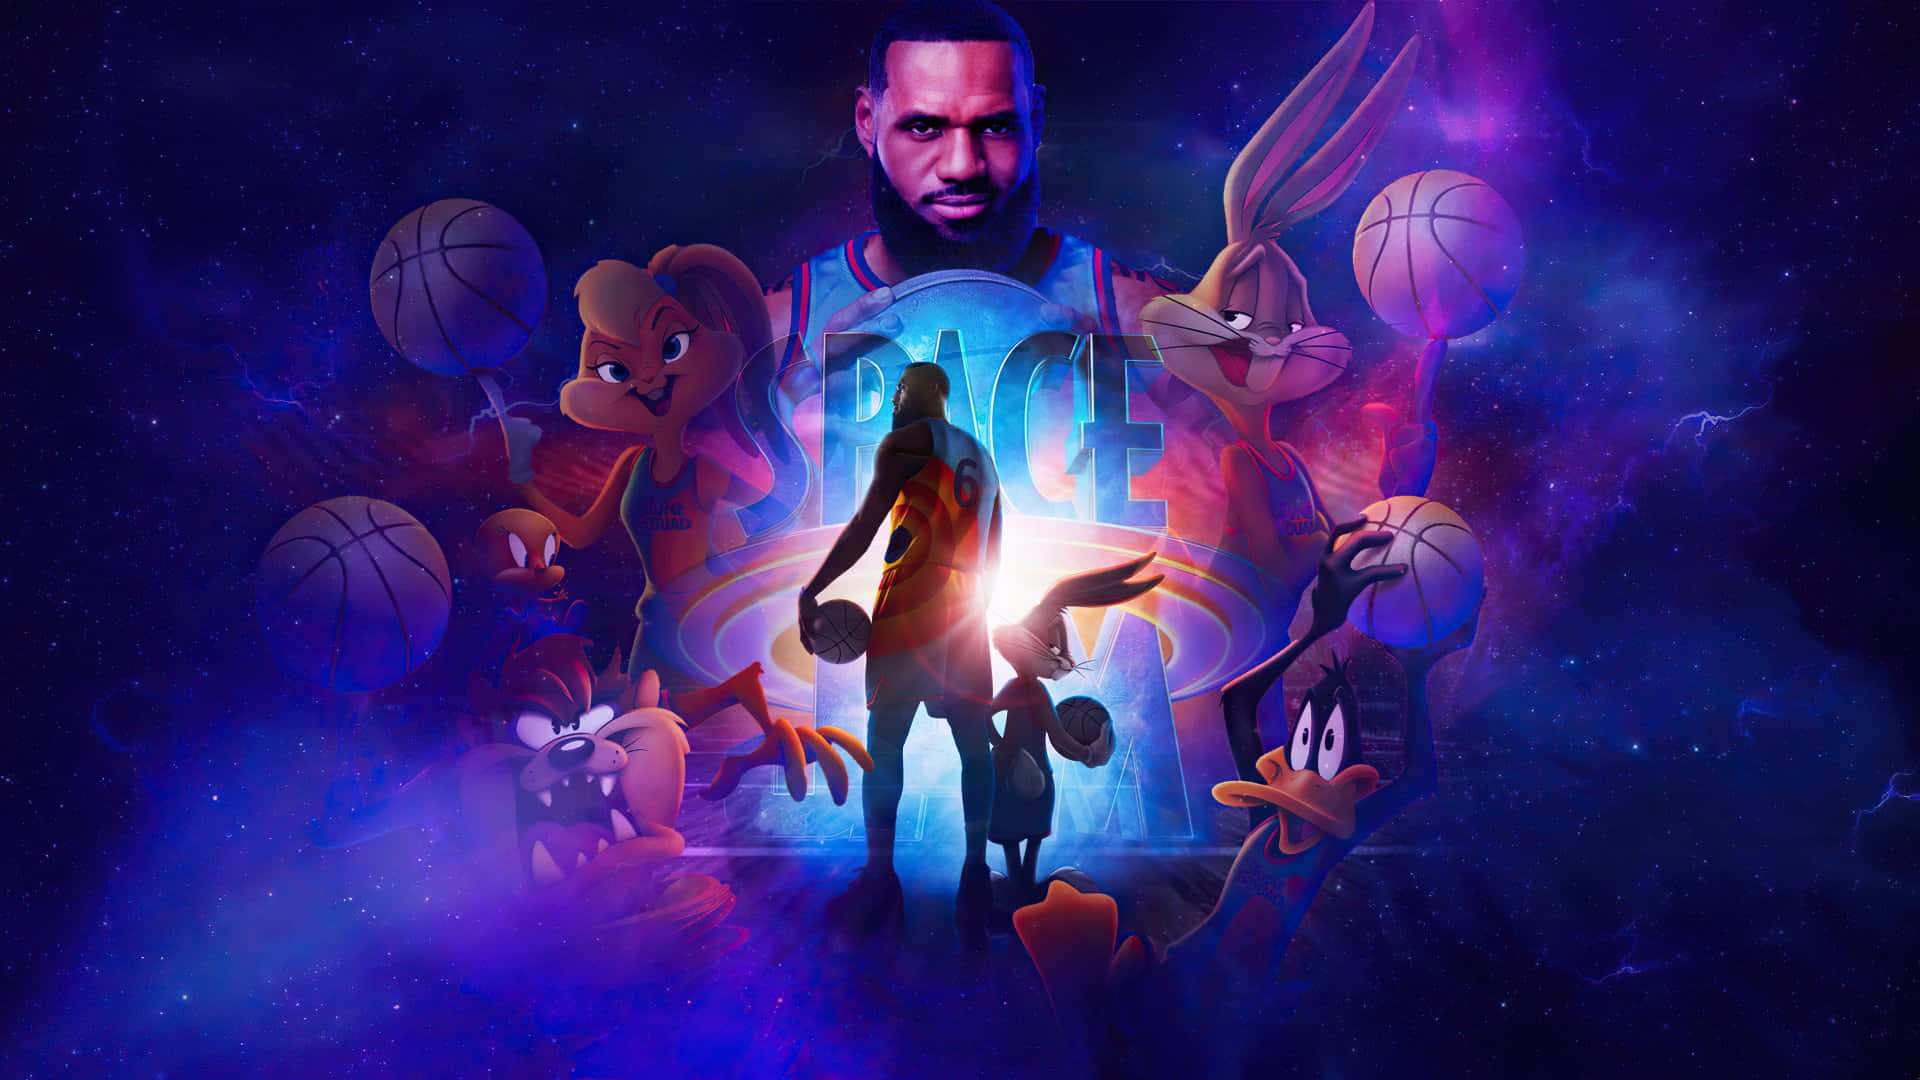 Space Jam 2 Wallpapers  Top 35 Best Space Jam A New Legacy Wallpapers  Download